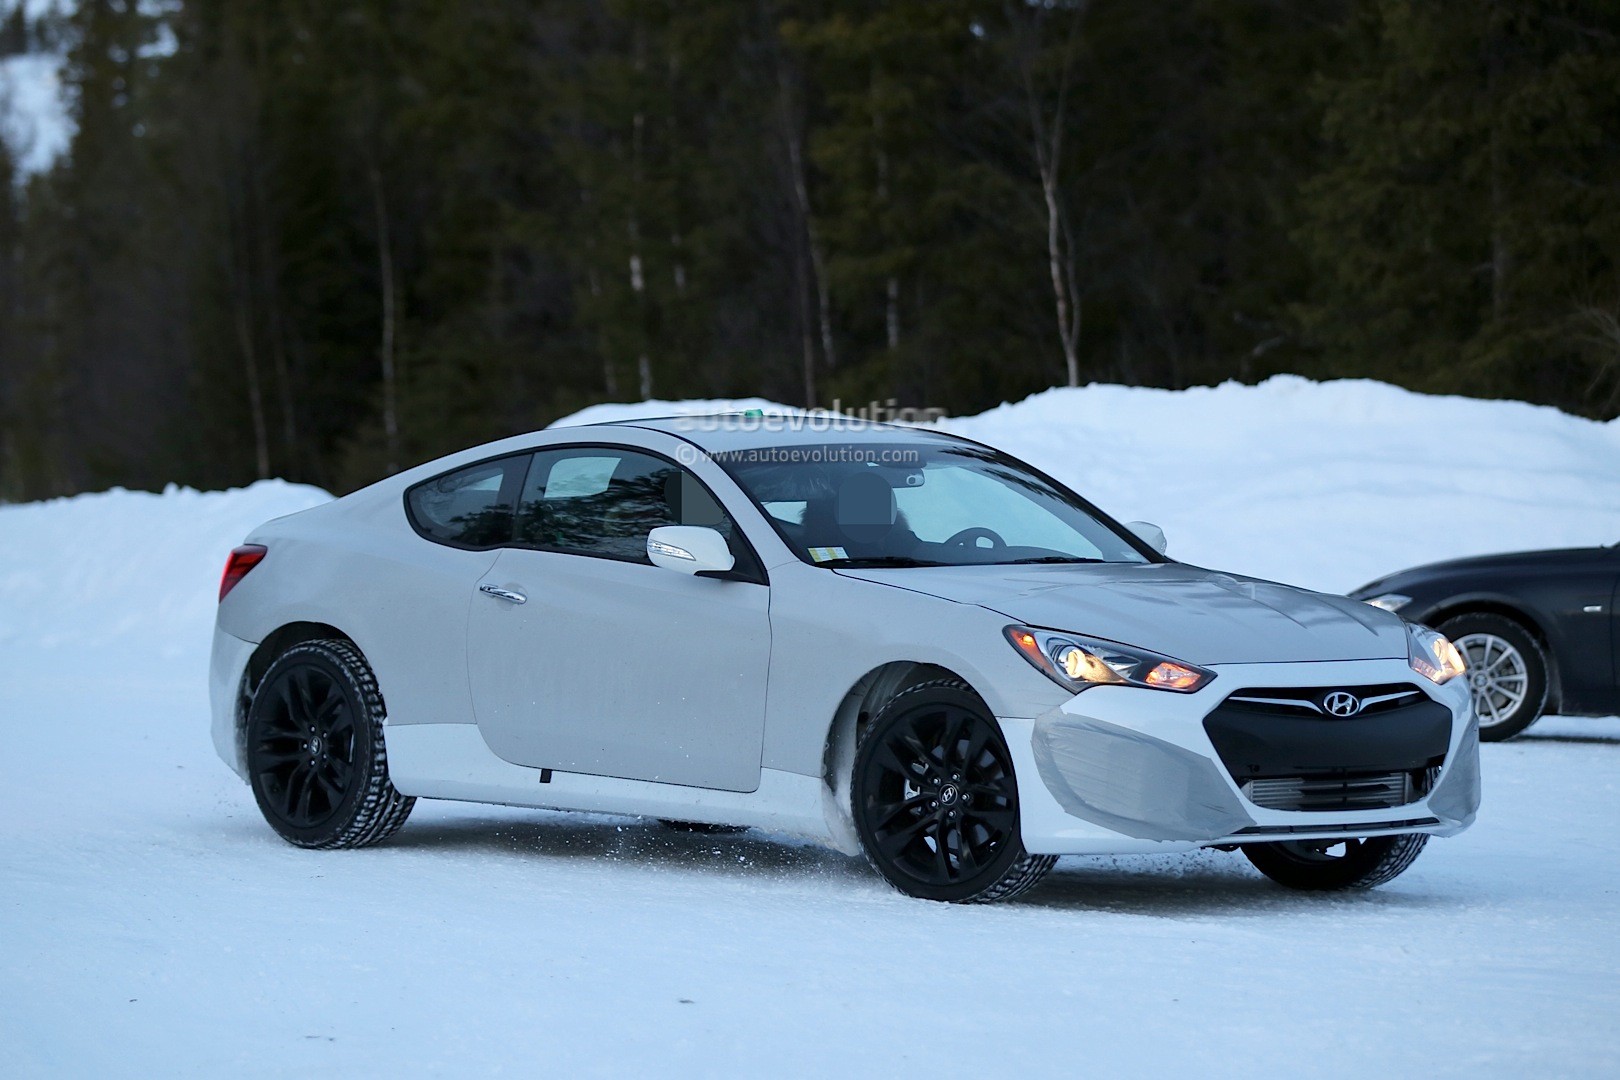 Spyshots 2017 Hyundai Genesis Coupe Mule Starts Winter Testing Is Expected To Get V8 Autoevolution